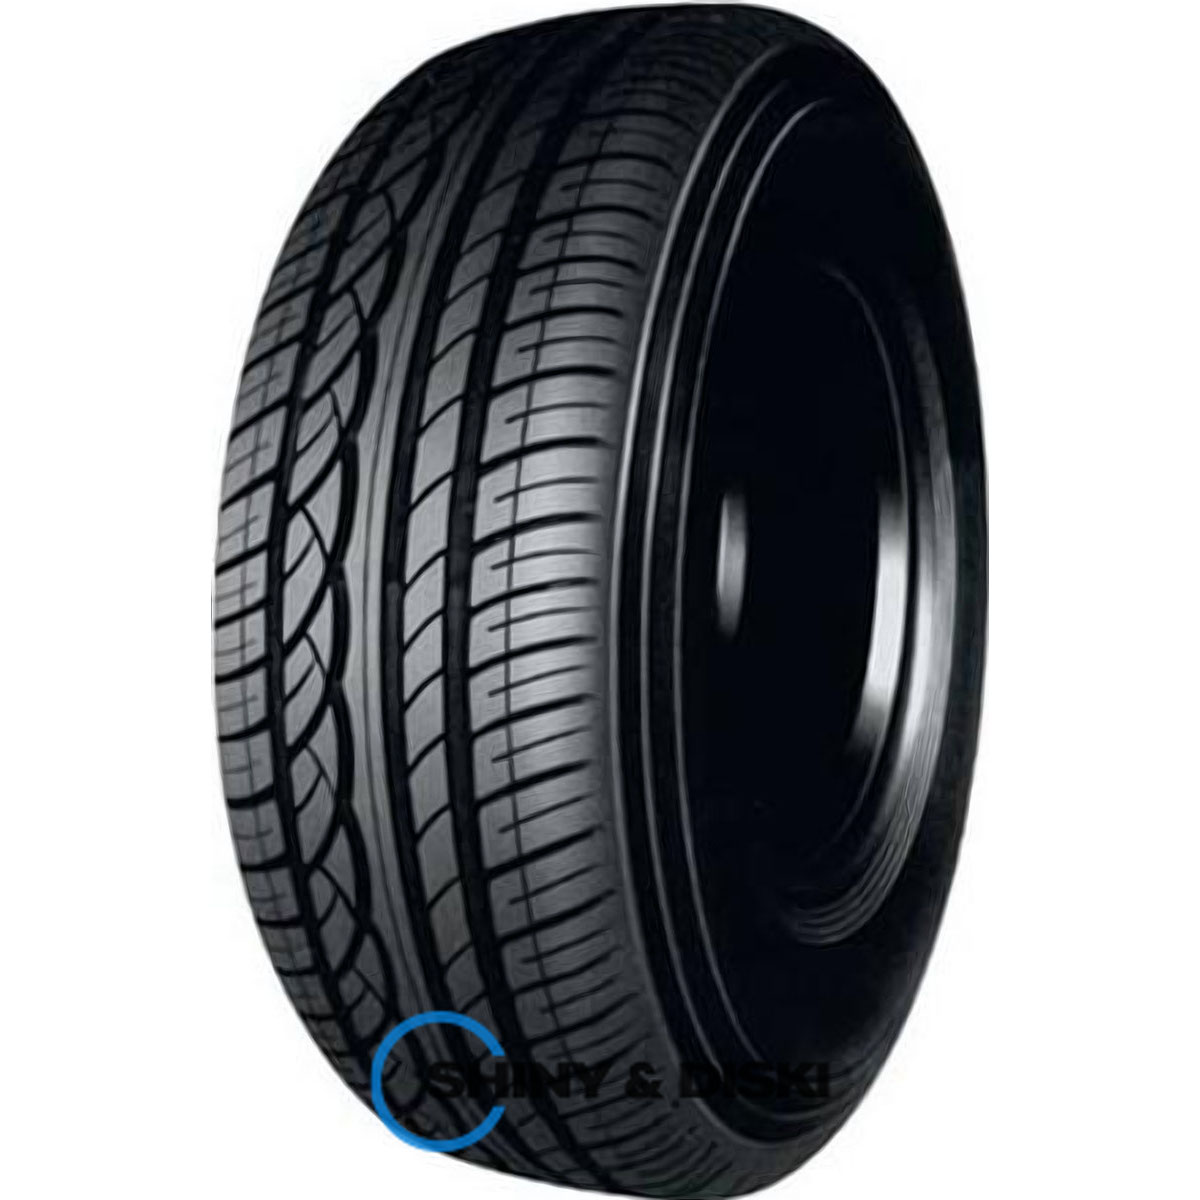 infinity inf-040 195/60 r15 88h